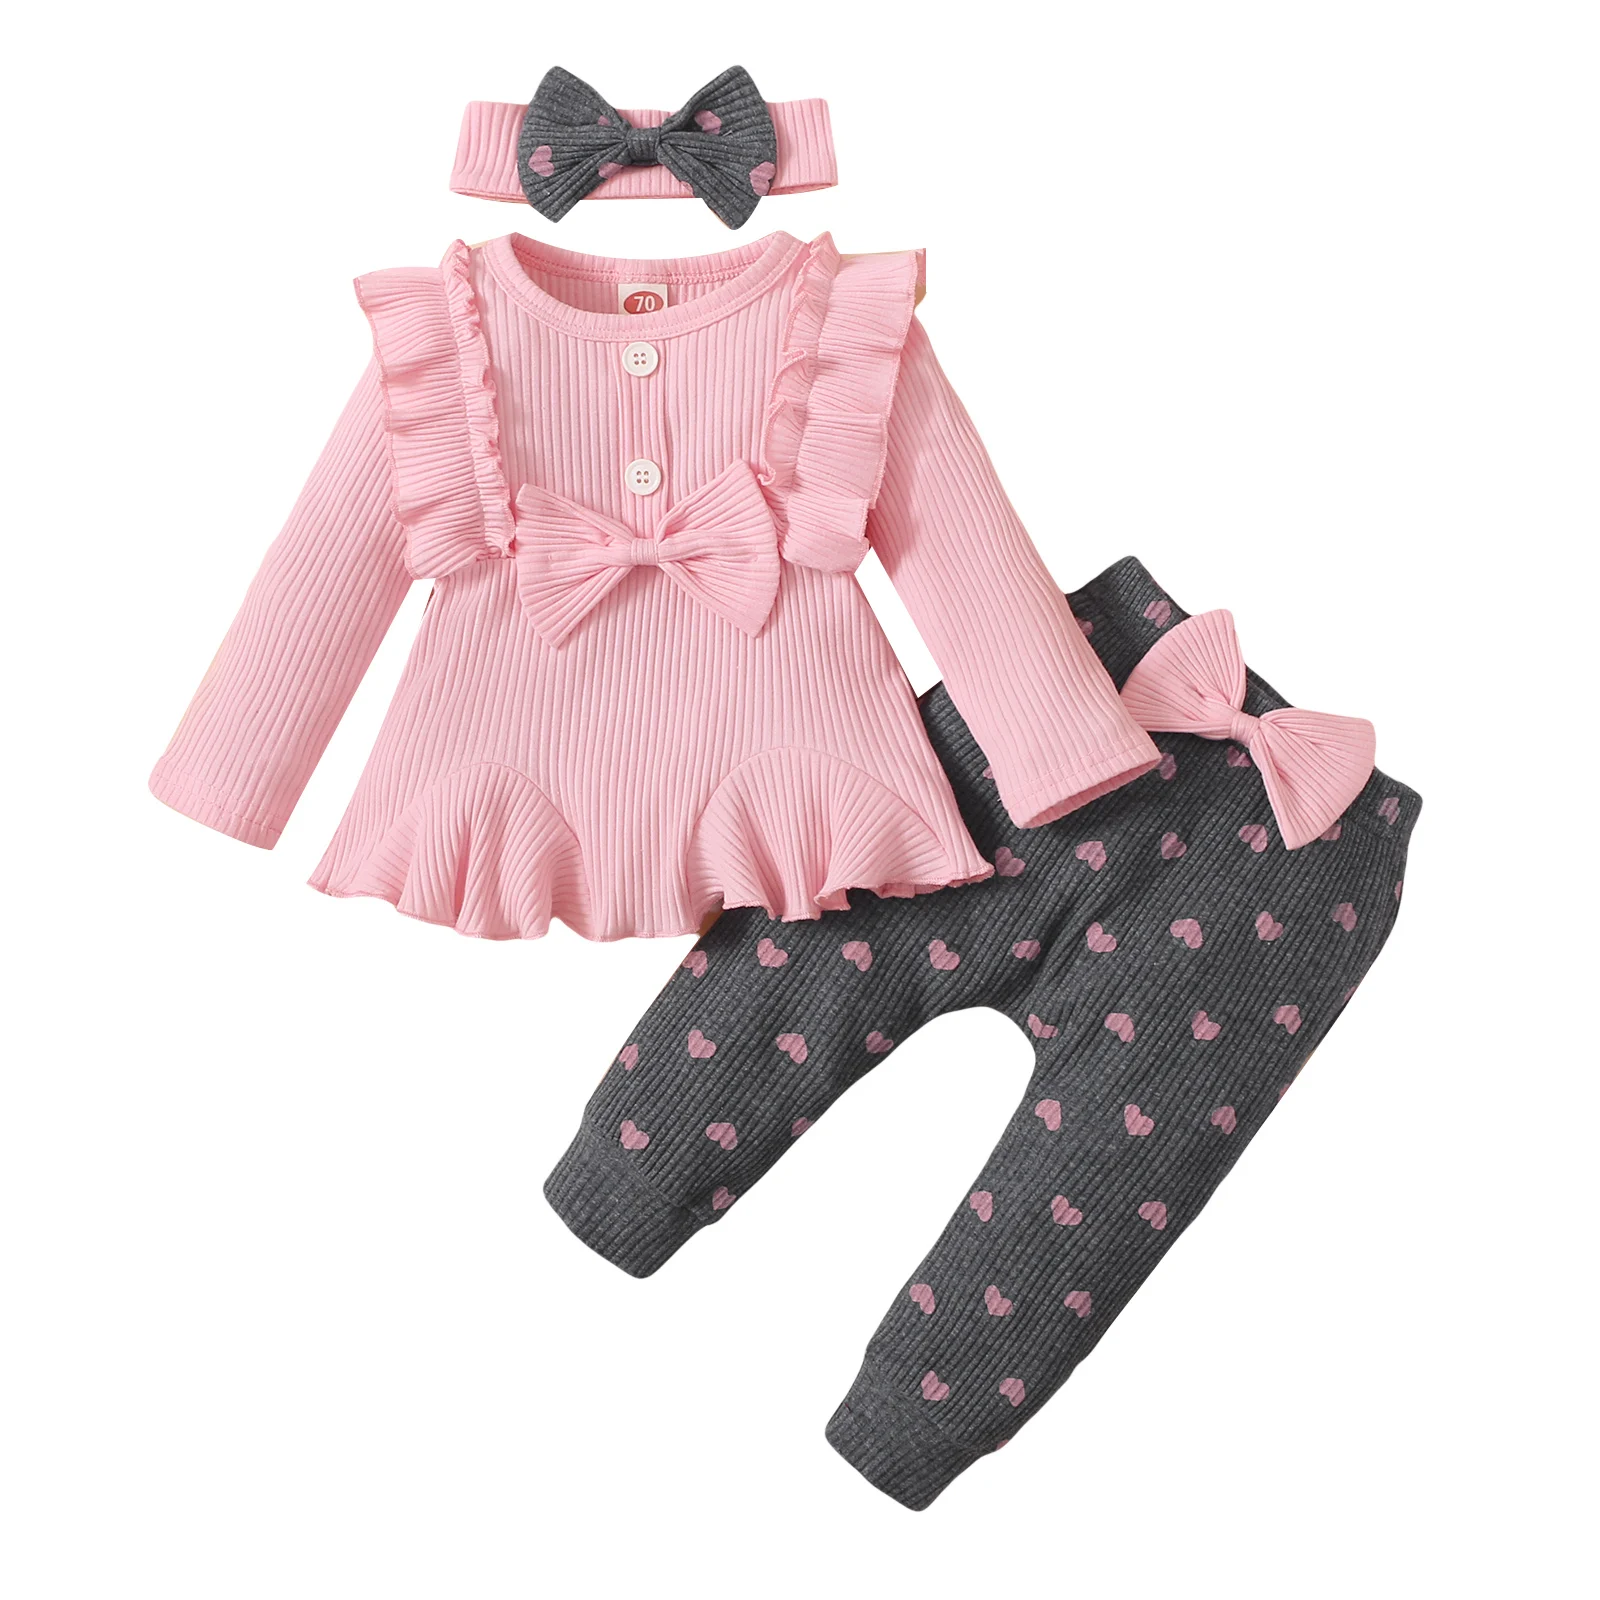 Newborn Baby Girls Clothes Set Pink Toddler Ruffle Tops Heart Print Bow Trousers Princess Casual Infant Outfits Clothes Suit sun baby clothing set